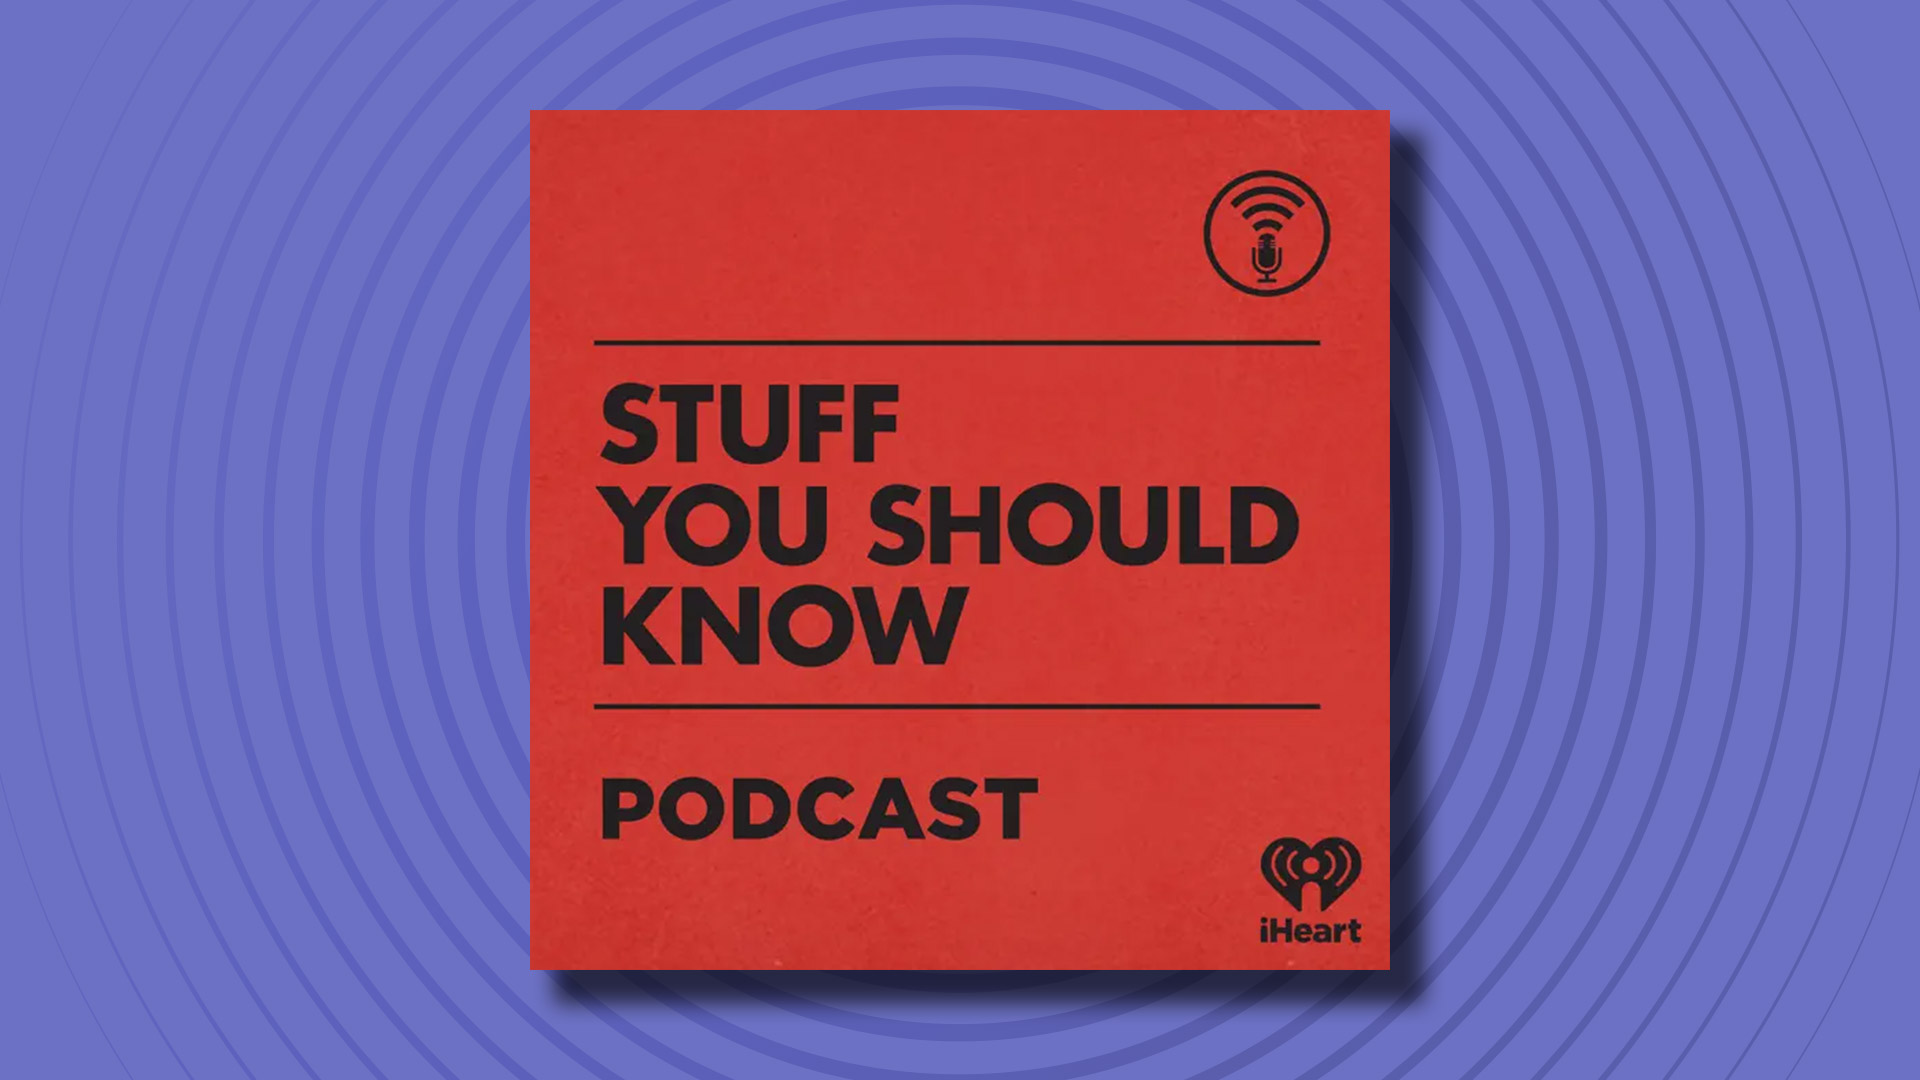 The logo of the Stuff You Should Know podcast on a purple background